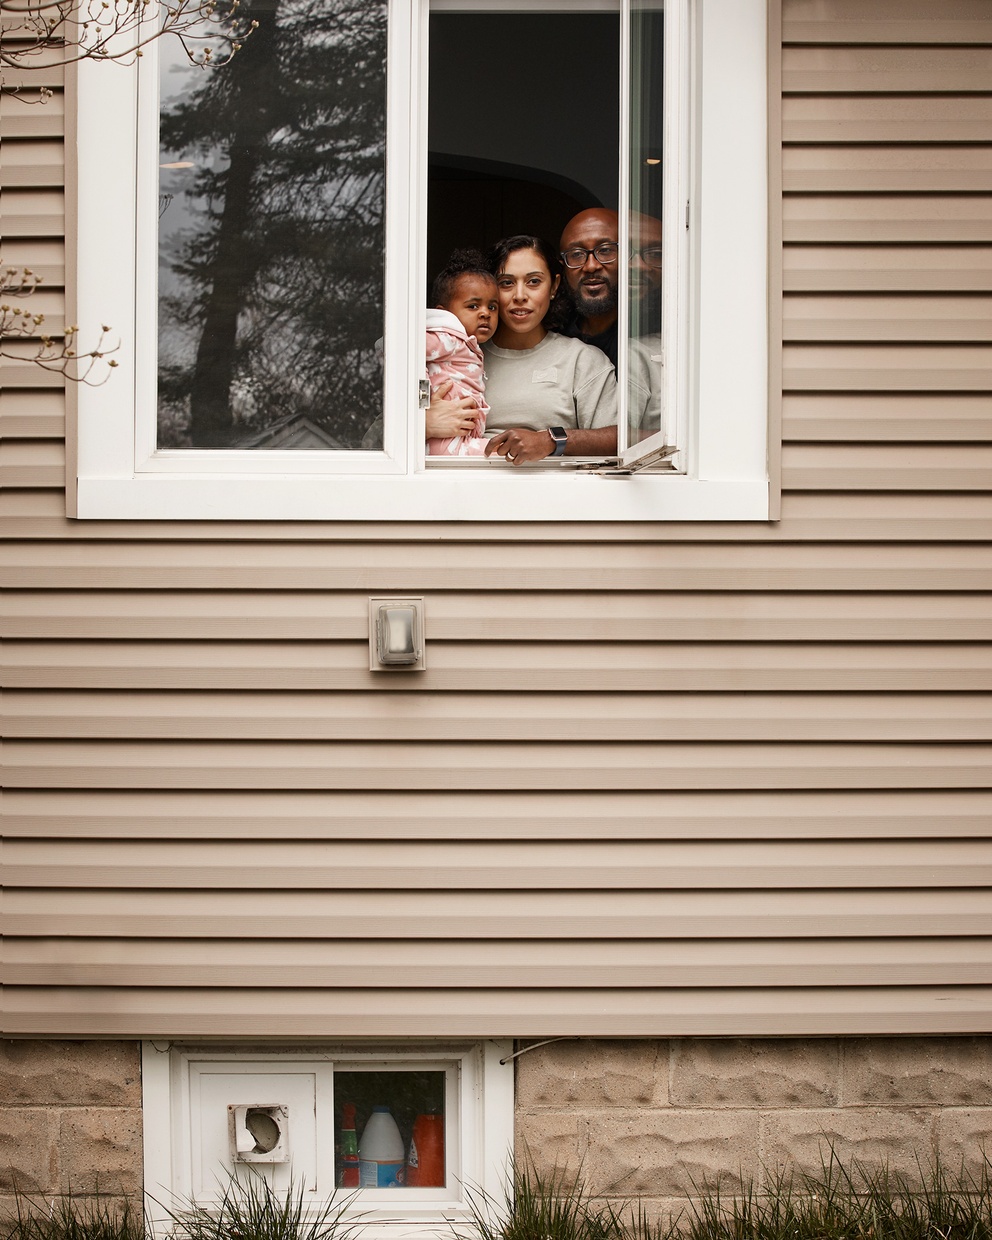 A photograph of a dark-skinned family, one adult male, one adult female, and one child, look out of a white framed window on a tan house.